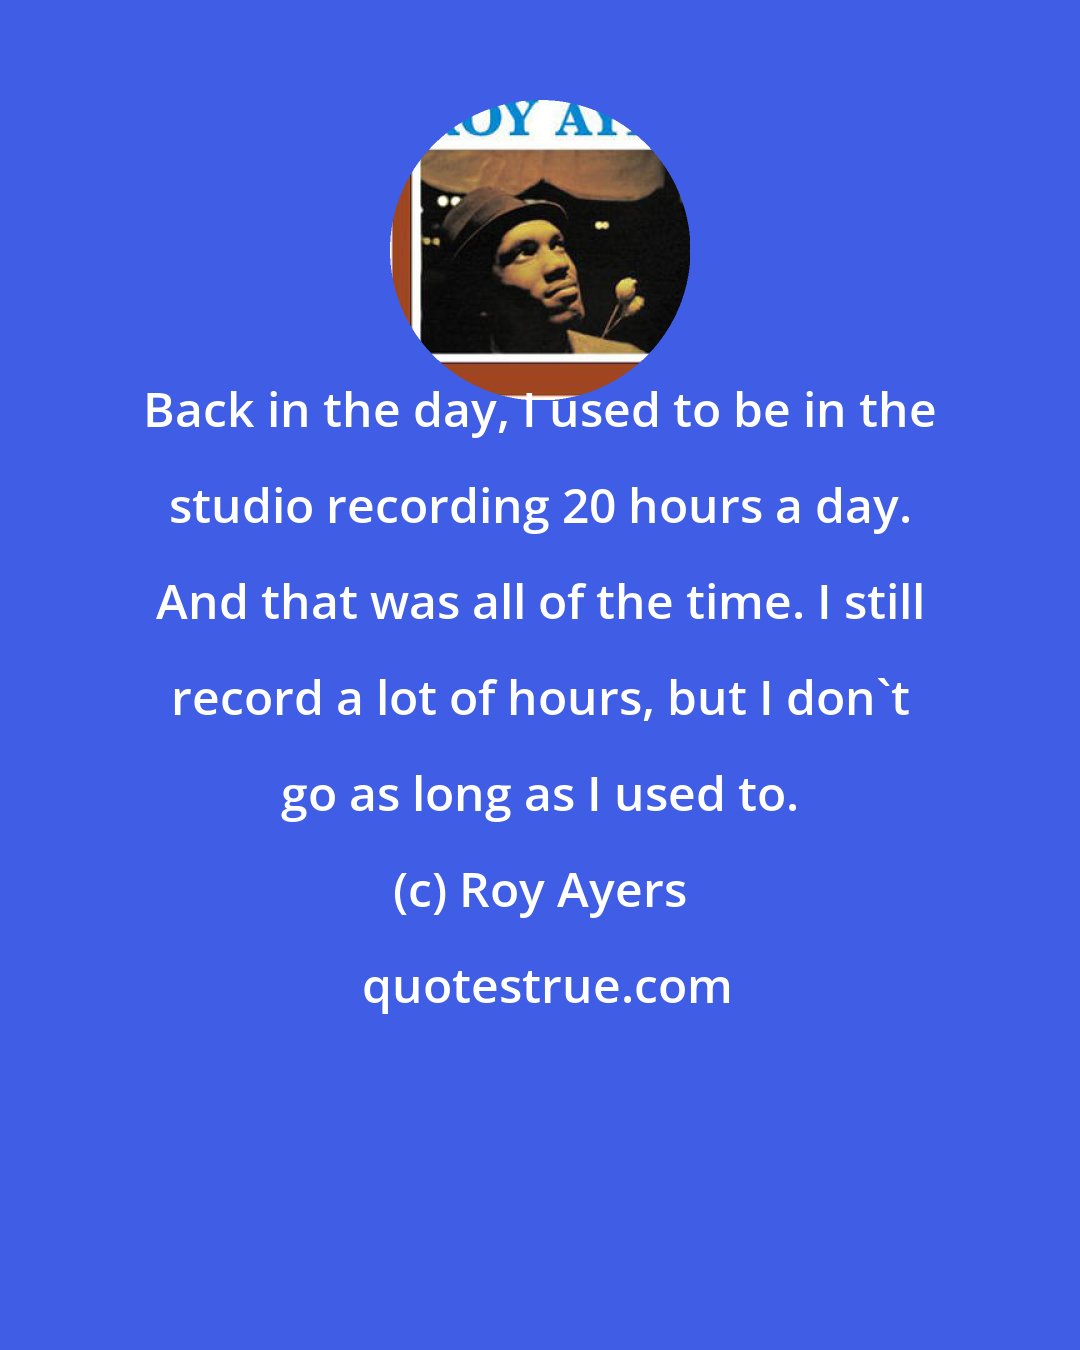 Roy Ayers: Back in the day, I used to be in the studio recording 20 hours a day. And that was all of the time. I still record a lot of hours, but I don't go as long as I used to.